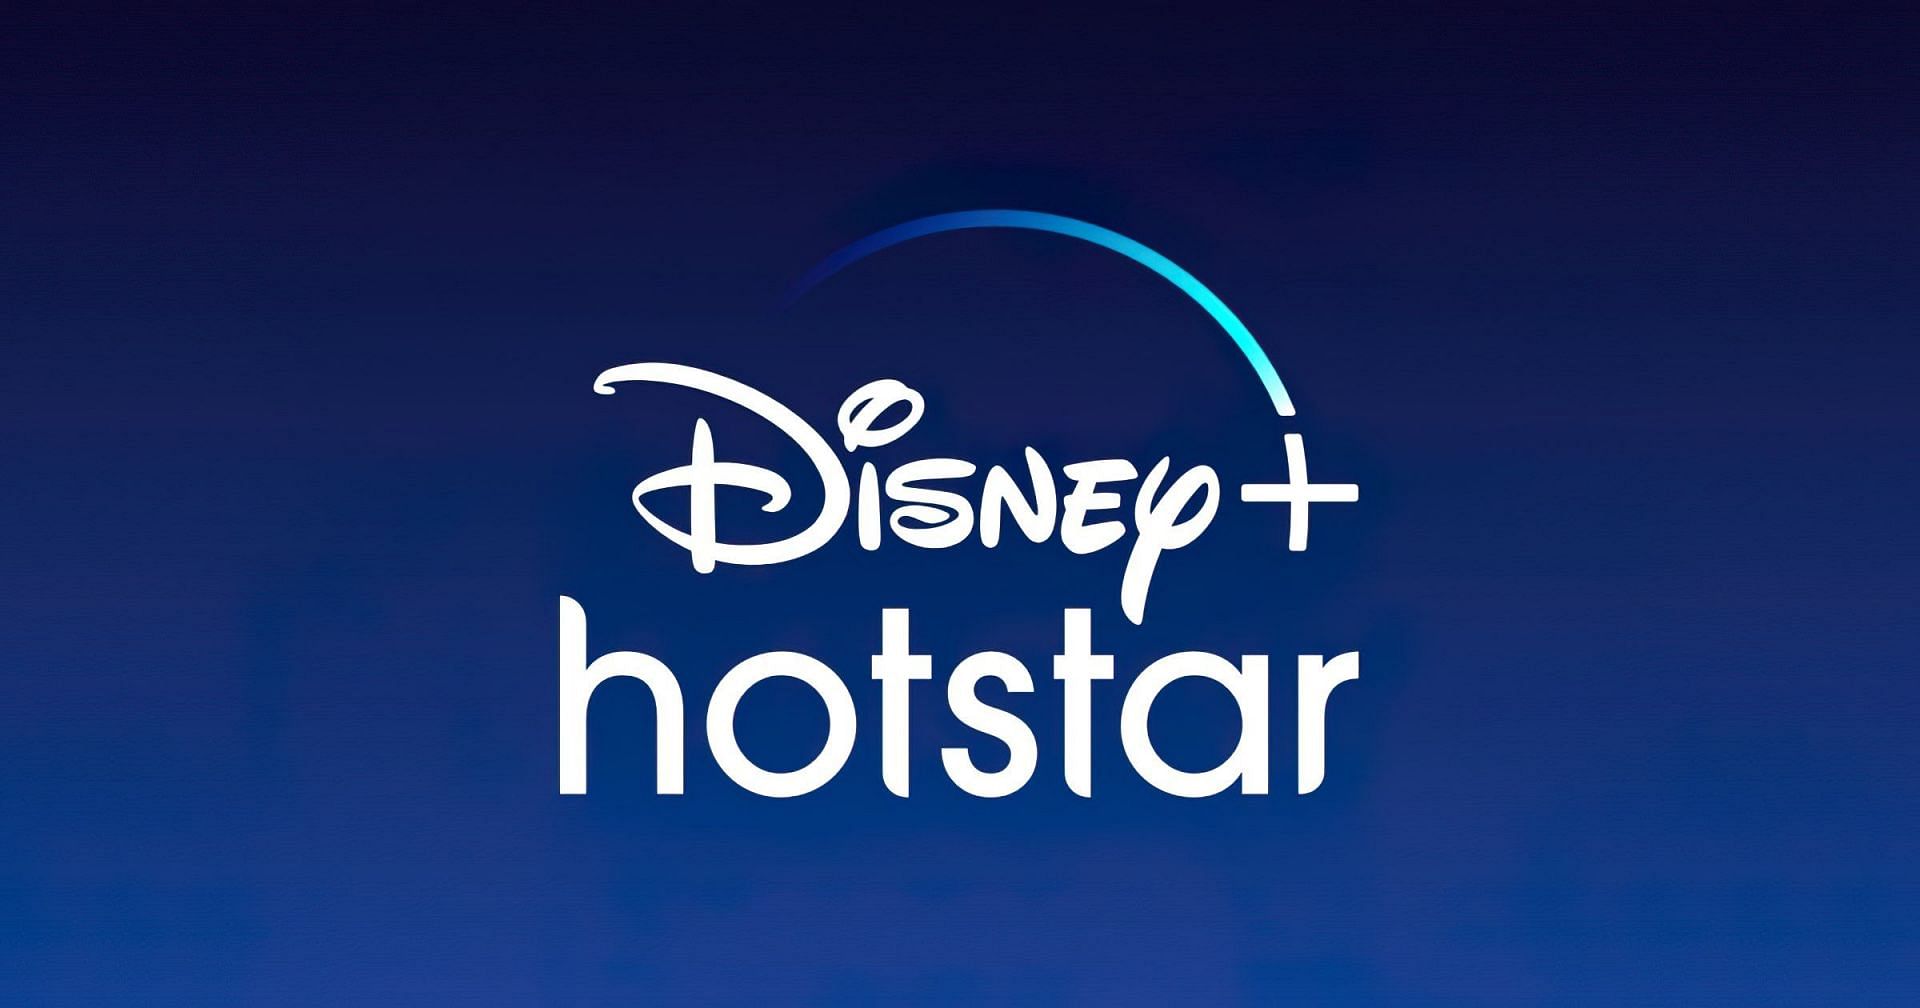 Disney+ Hotstar offers a seamless and immersive streaming experience (Image via Hotstar)